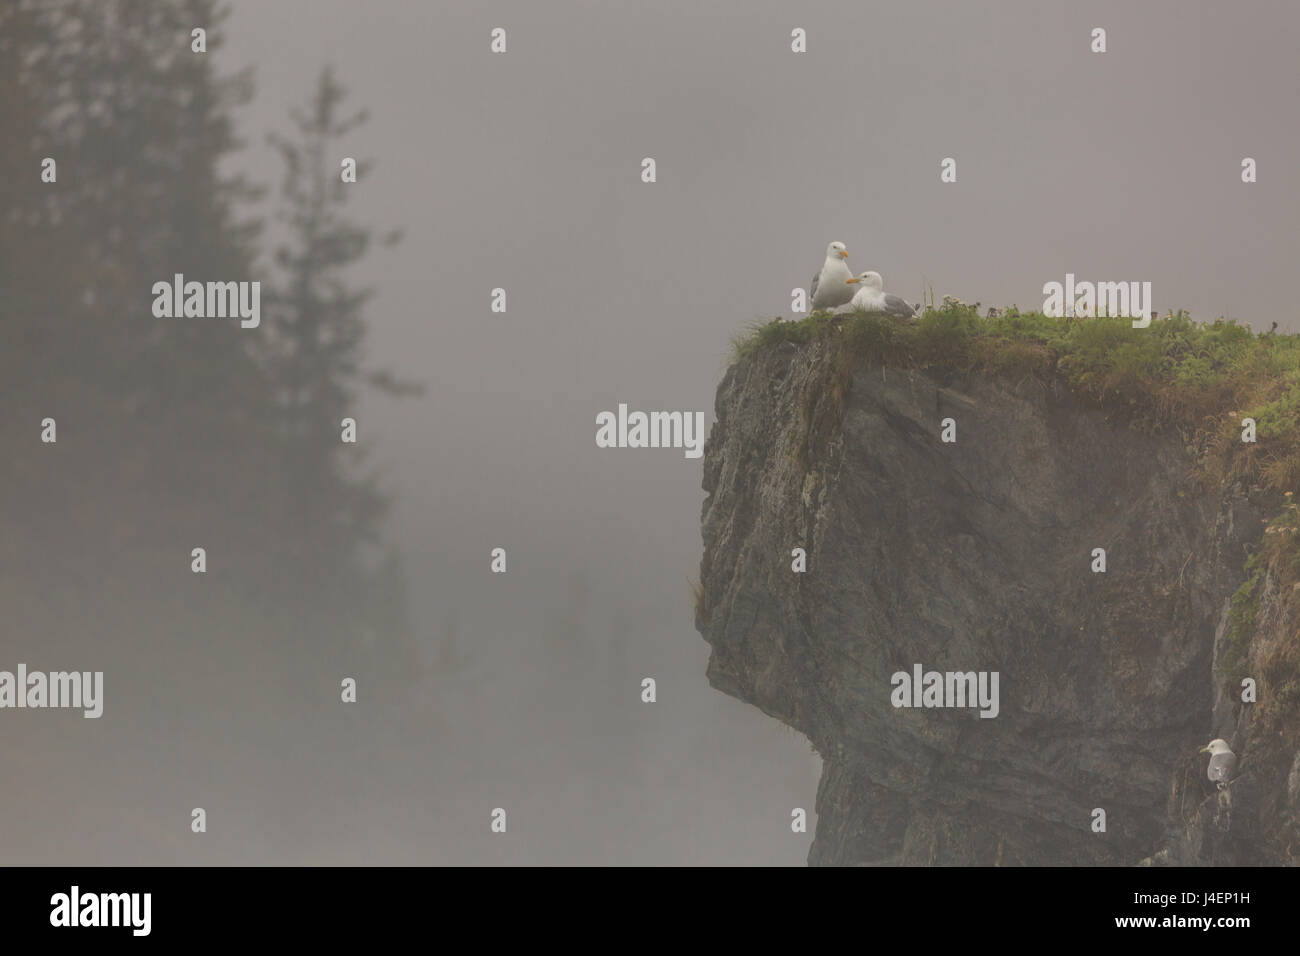 Glacous-winged gulls (Larus glaucescens) perched on a cliff in the mist, Valdez, Alaska, United States of America, North America Stock Photo